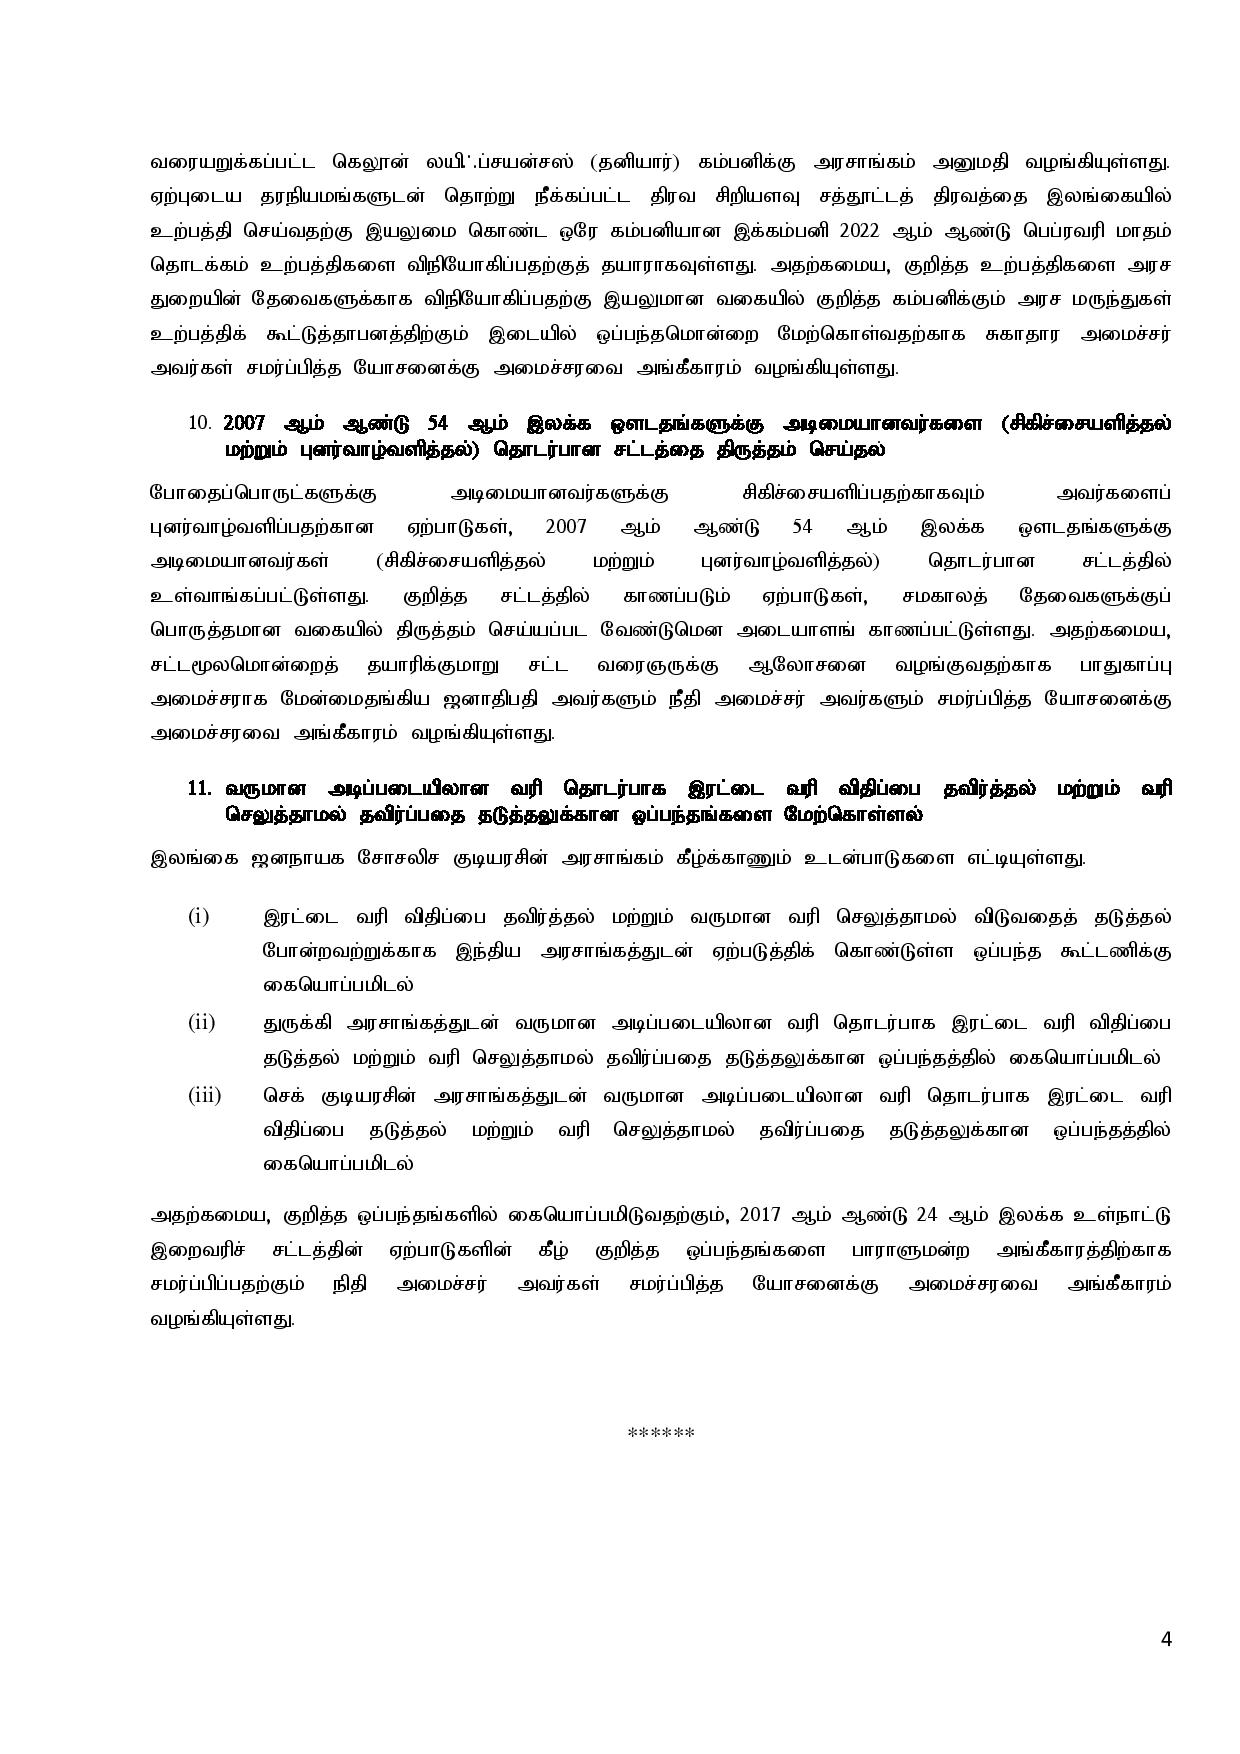 Cabinet Decisions on 24.01.2022 Tamil page 004